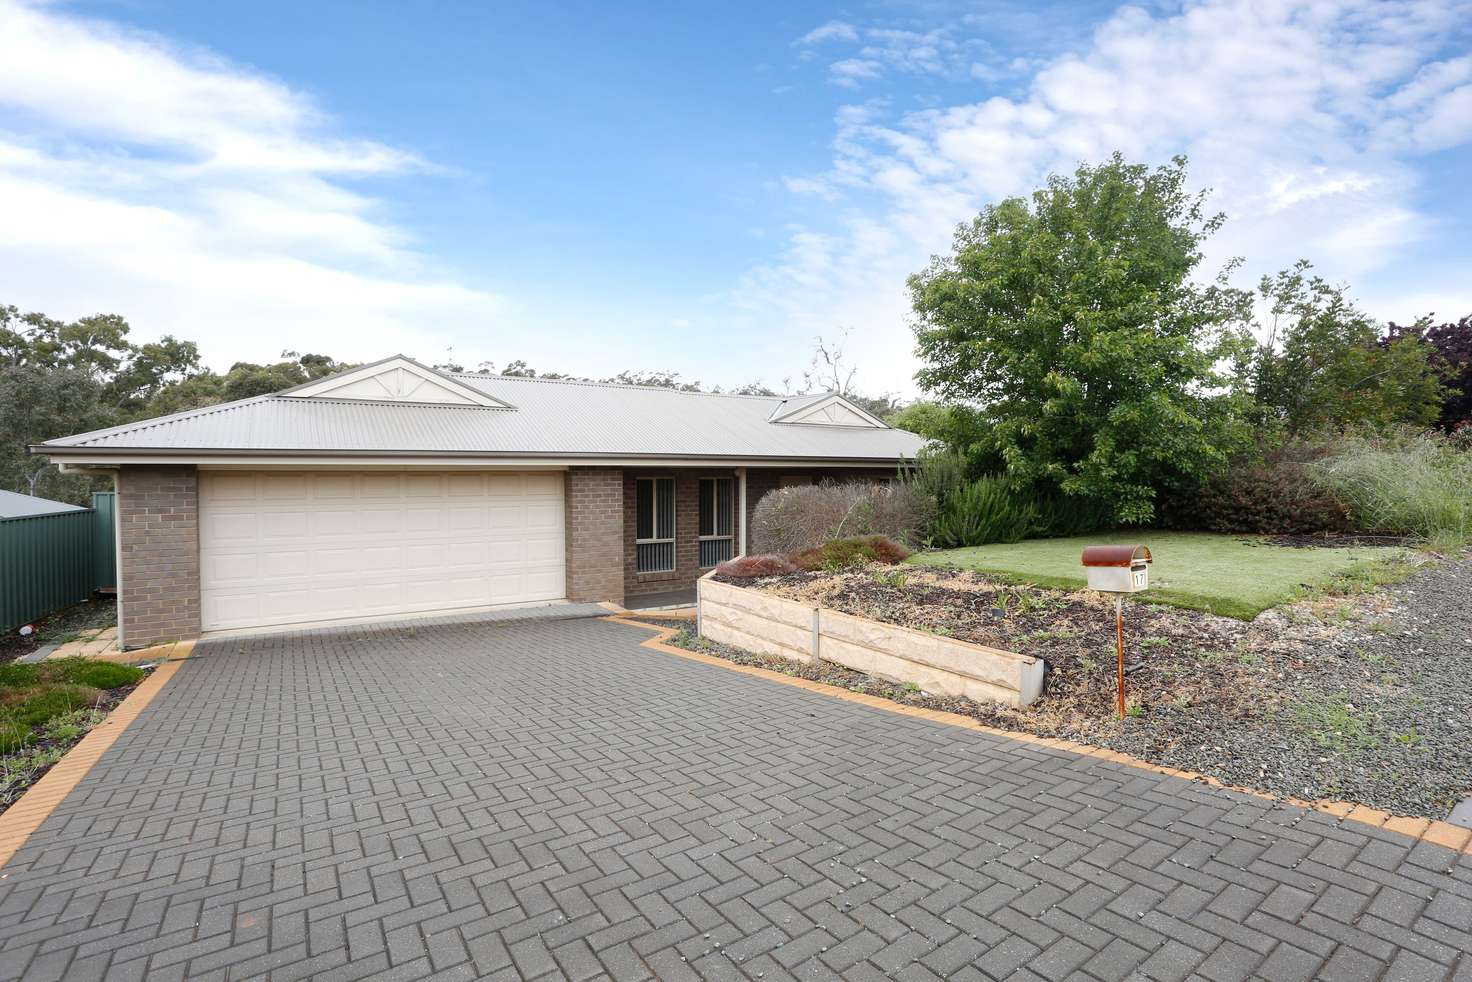 Main view of Homely house listing, 17 Trezise Way, Clare SA 5453